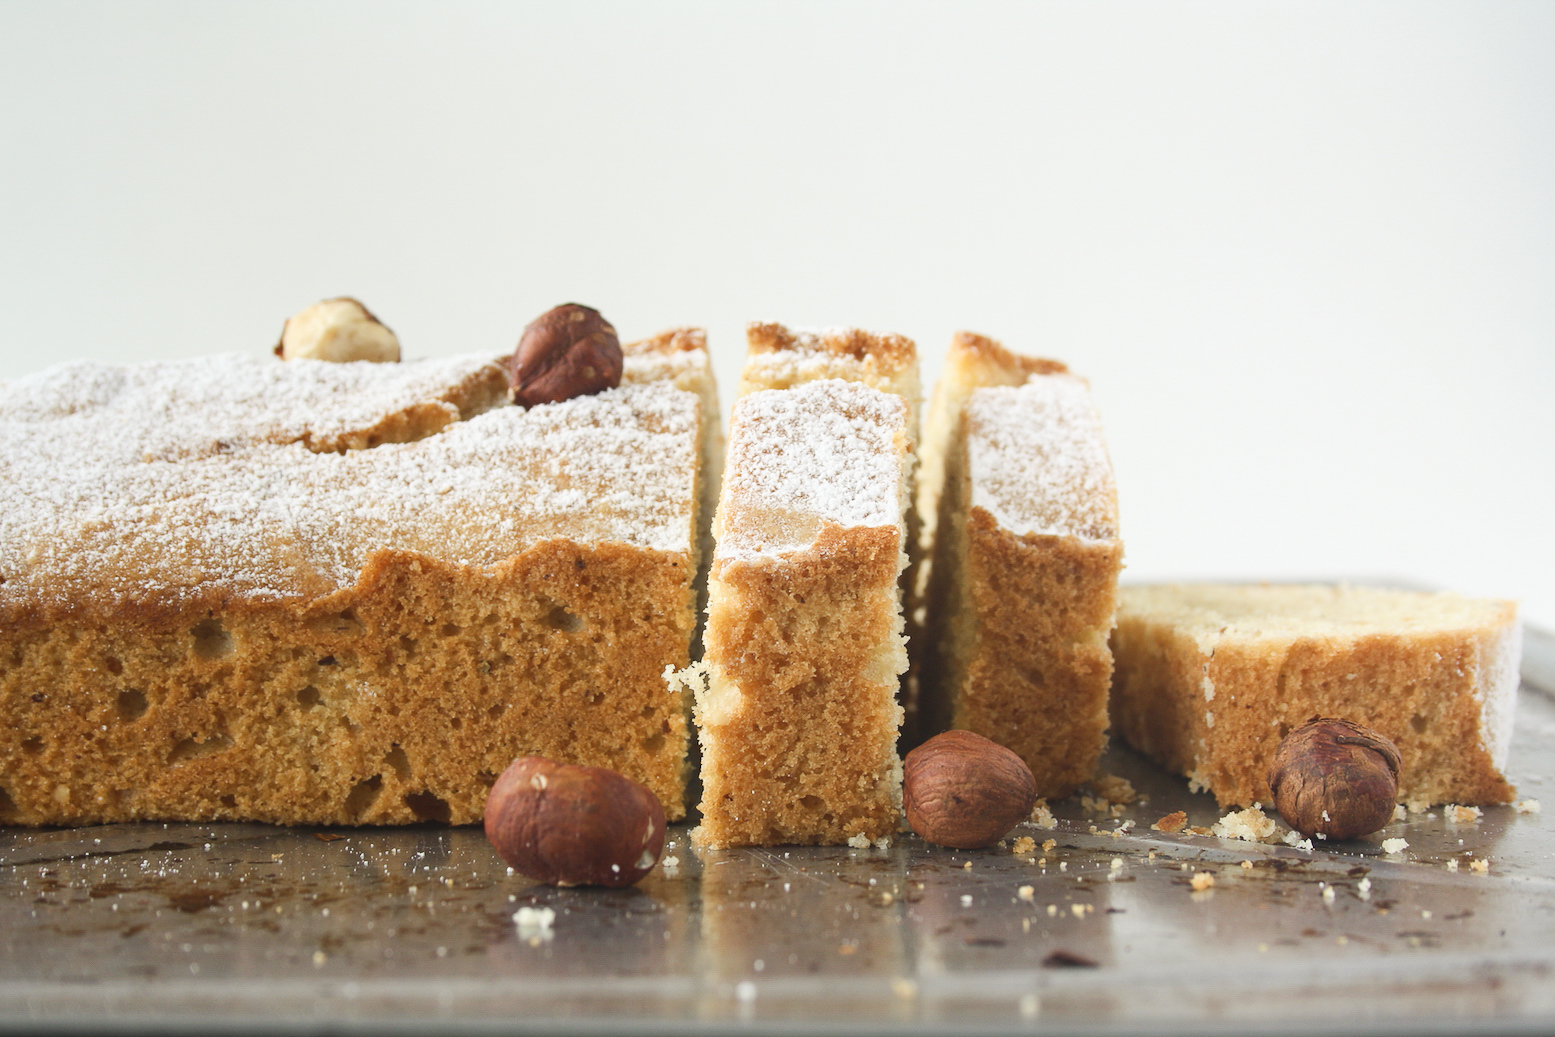 Tender butter cake made with ground hazelnuts